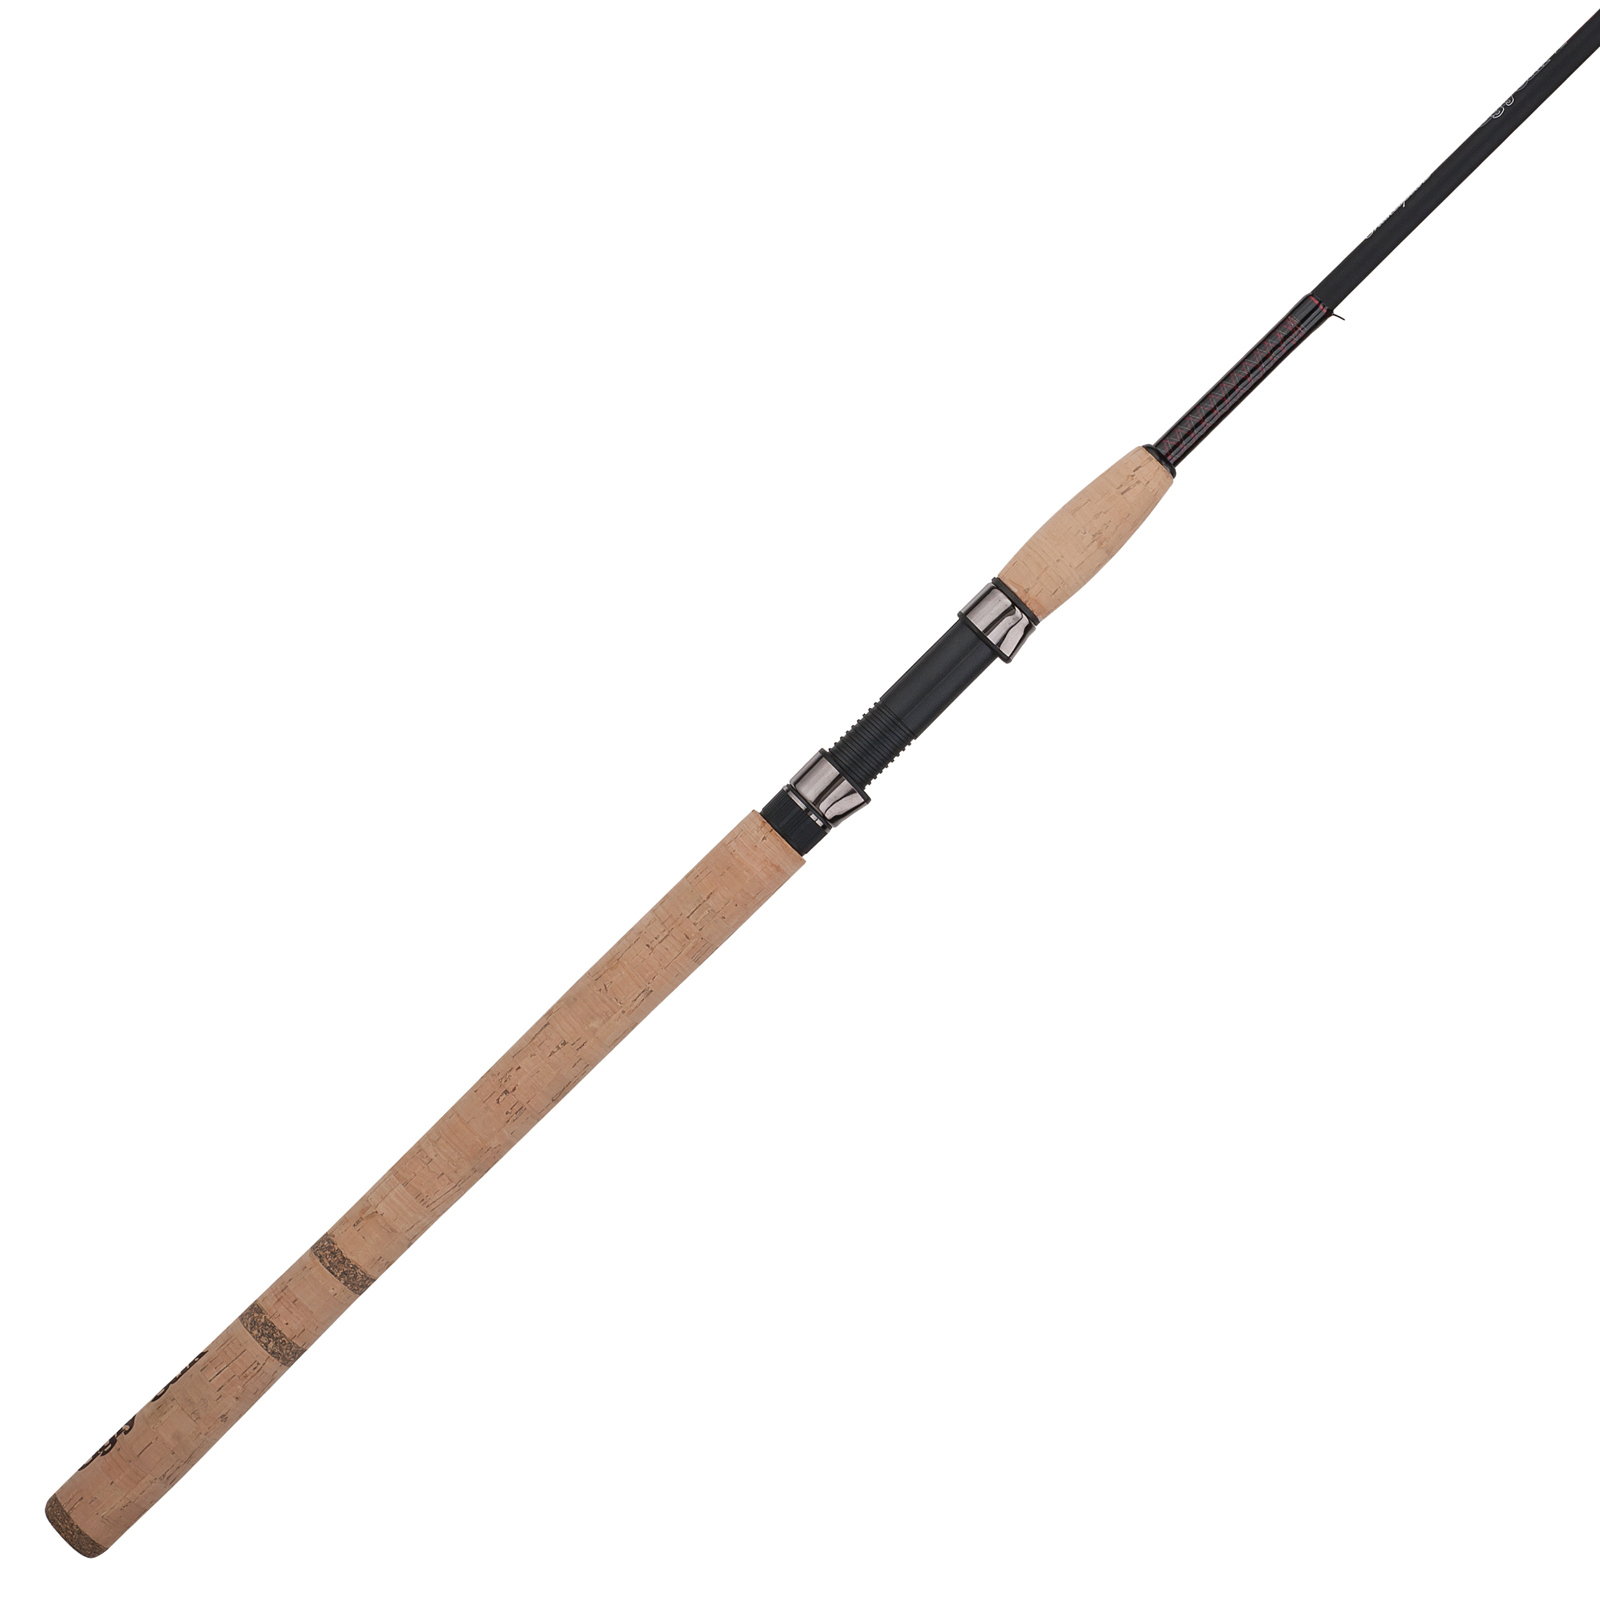 Ugly Stik Elite Spinning Rod, 2 Piece, Fast, Medium, 3/8-3/4oz Lures, 8 lb,  14lb, 7 Guides USESSP862M , $4.04 Off with Free S&H — CampSaver